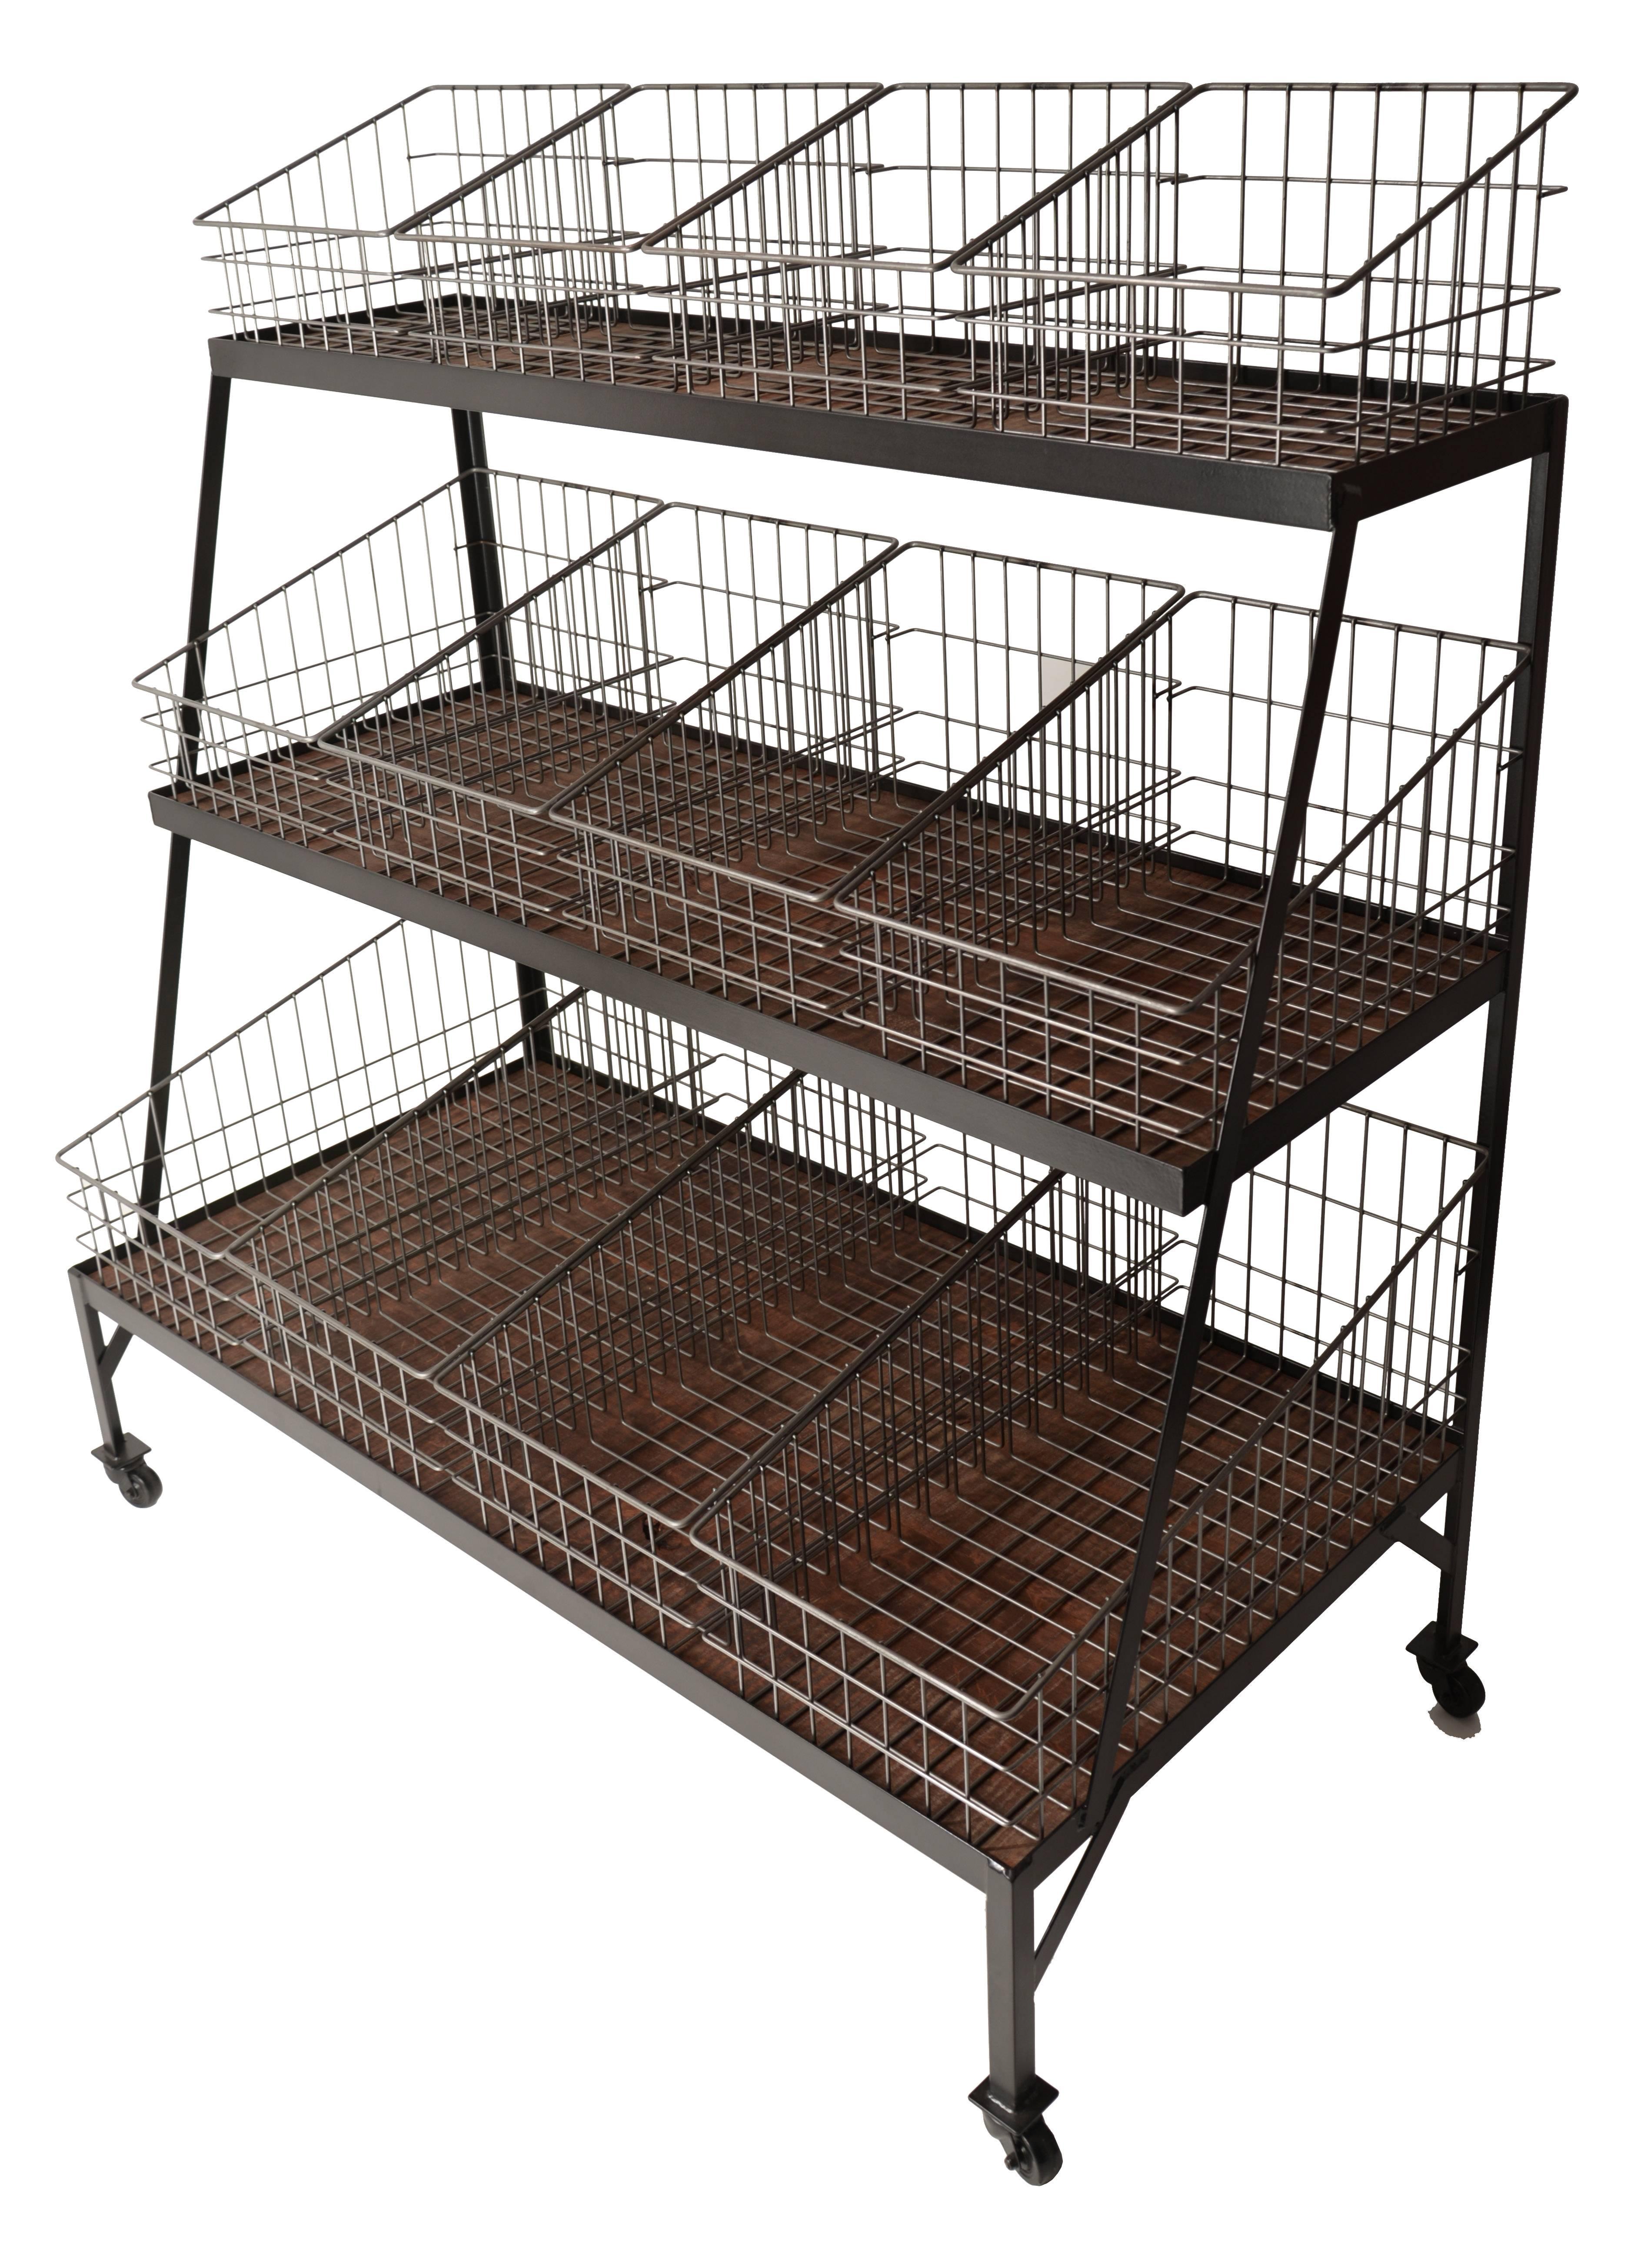 Three-tiered steel frame on steel casters. Each level contains four removable wire-framed baskets on a wooden shelf. This piece was inspired by an original mercantile display unit found in Nashville, Tennessee that dates from the 1920s. Please